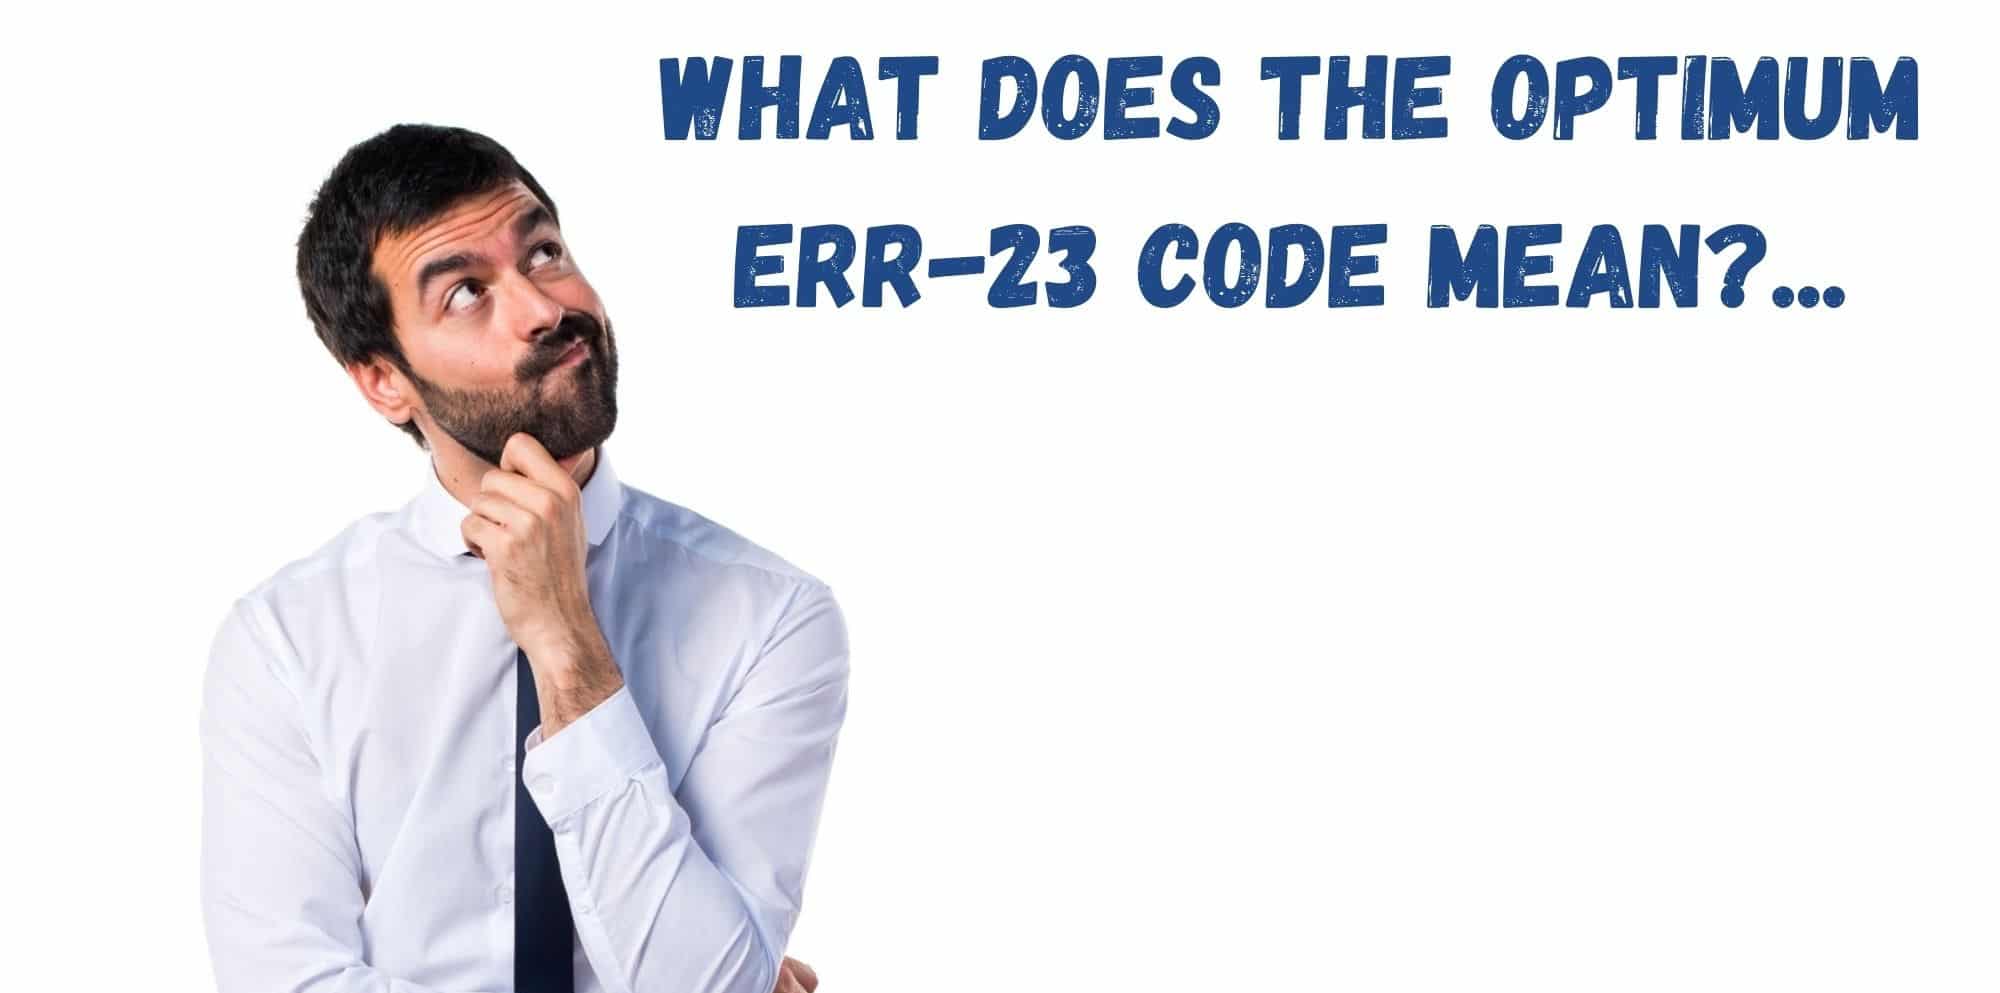 What Does the Optimum Err-23 Code Mean